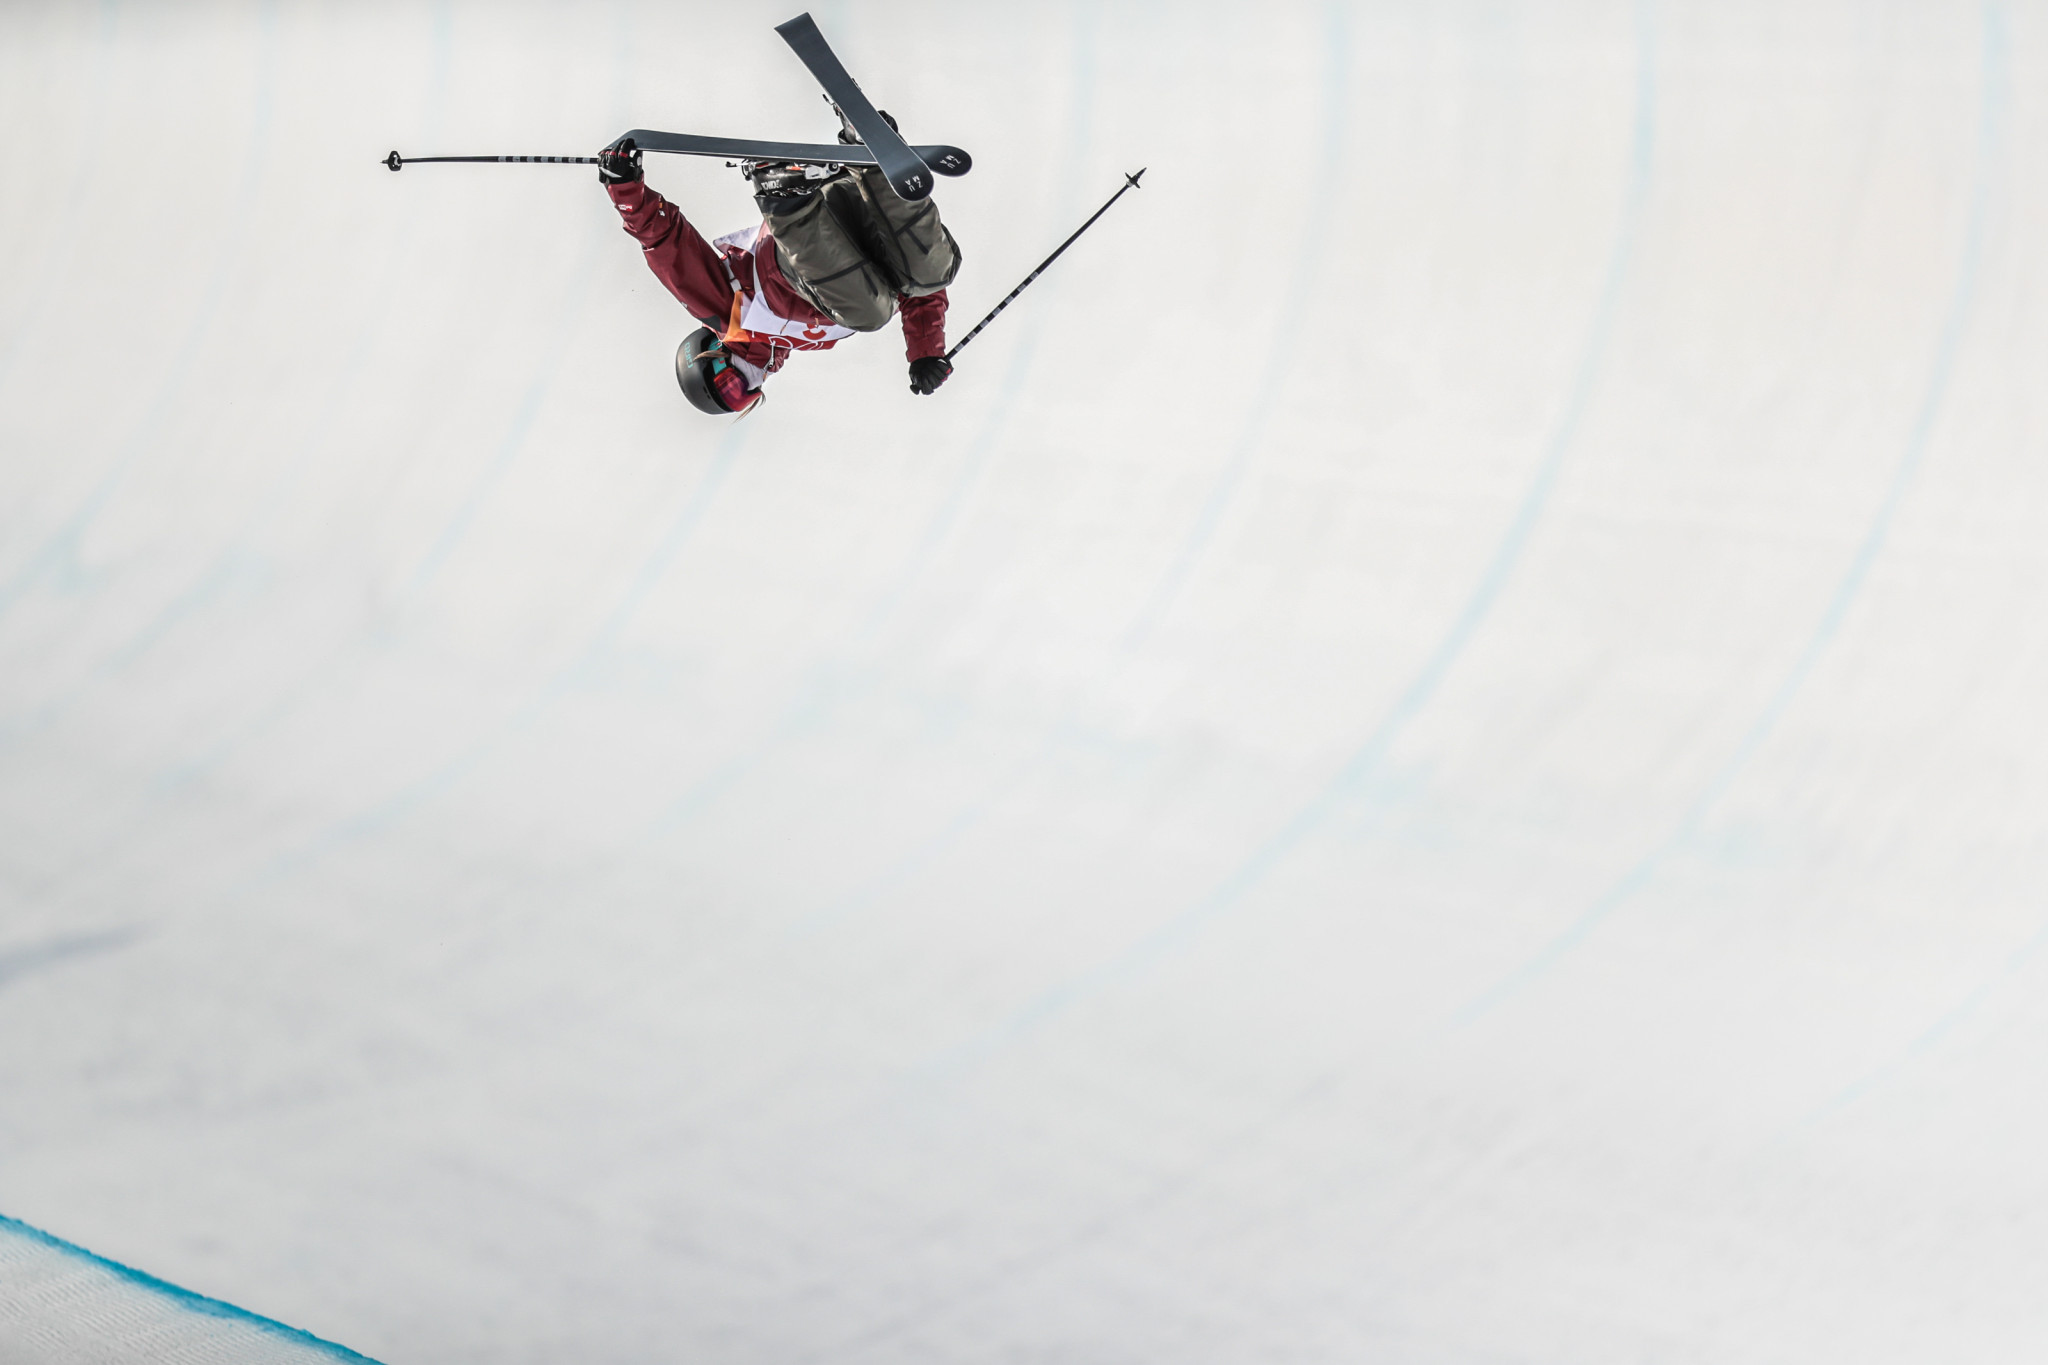 Cassie Sharpe claimed women's ski halfpipe gold for Canada ©Getty Images